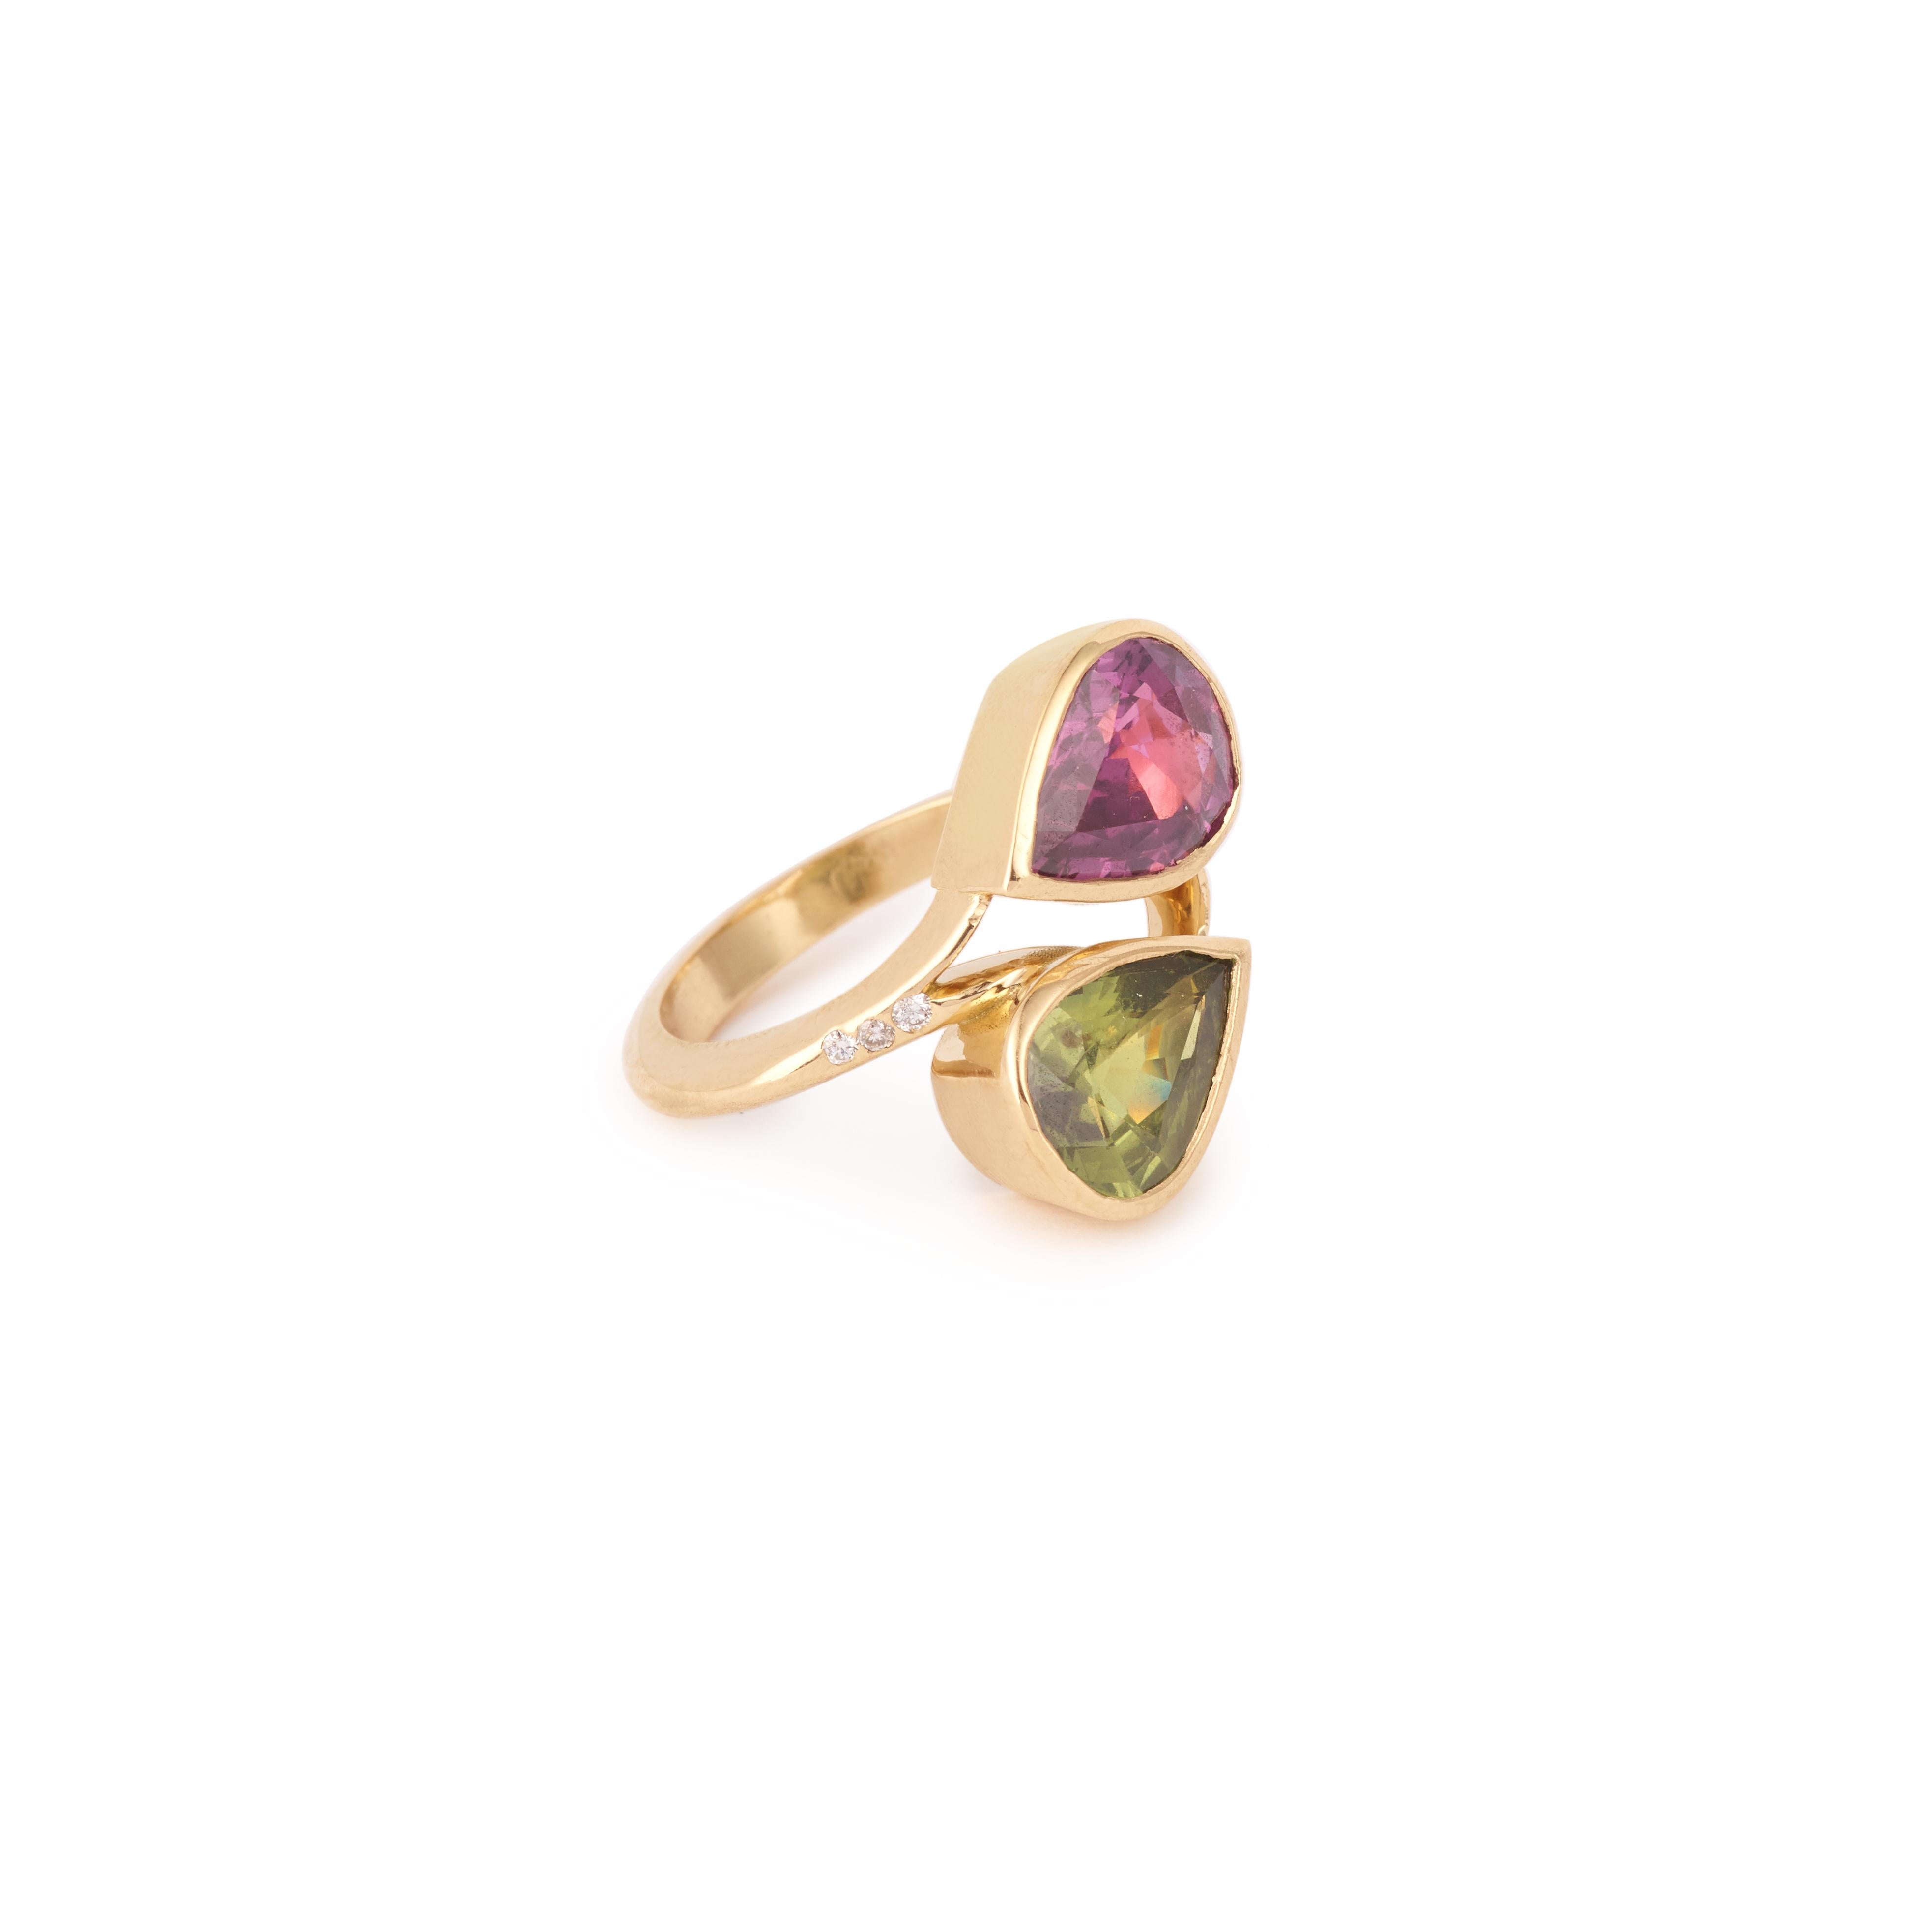 Yellow gold toi et moi ring set with a green sapphire and a pink sapphire, both pear shapped, and brilliant cut diamonds.

Pink sapphire weight : 3.16 carats

Green sapphire weight : 3.16 carats

Total diamond weight : 0.06 carats

Dimensions : 1.77